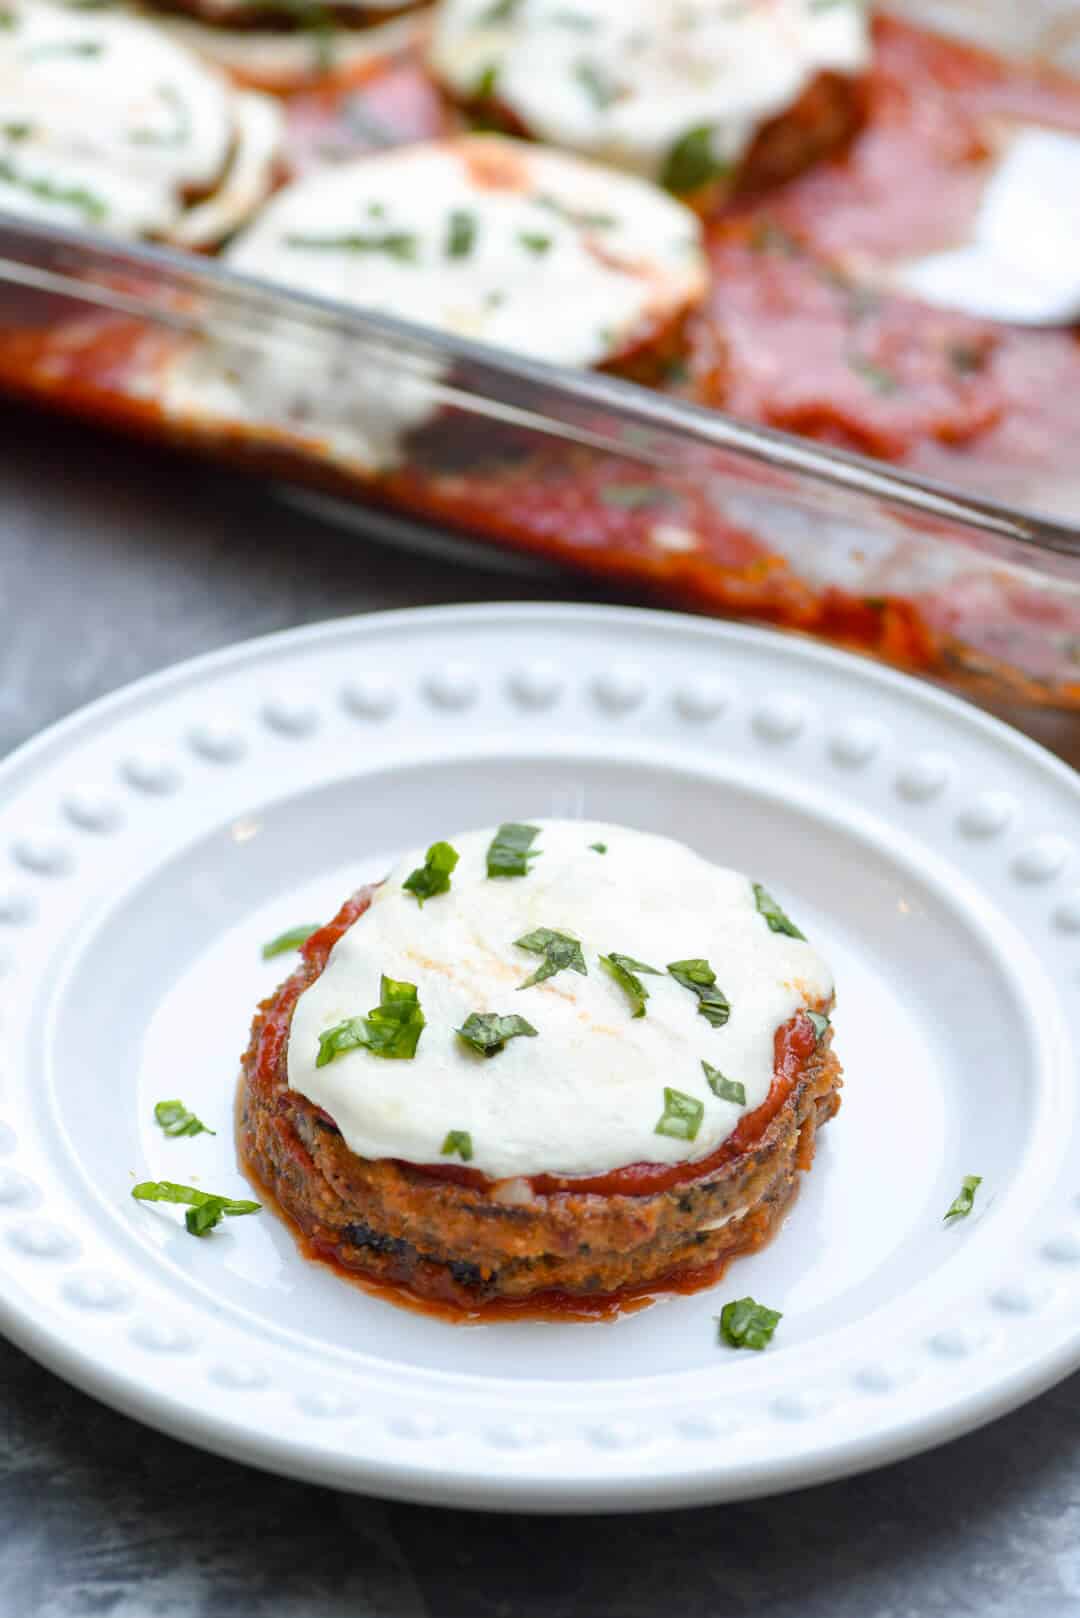 A serving of eggplant parmesan on a white plate.